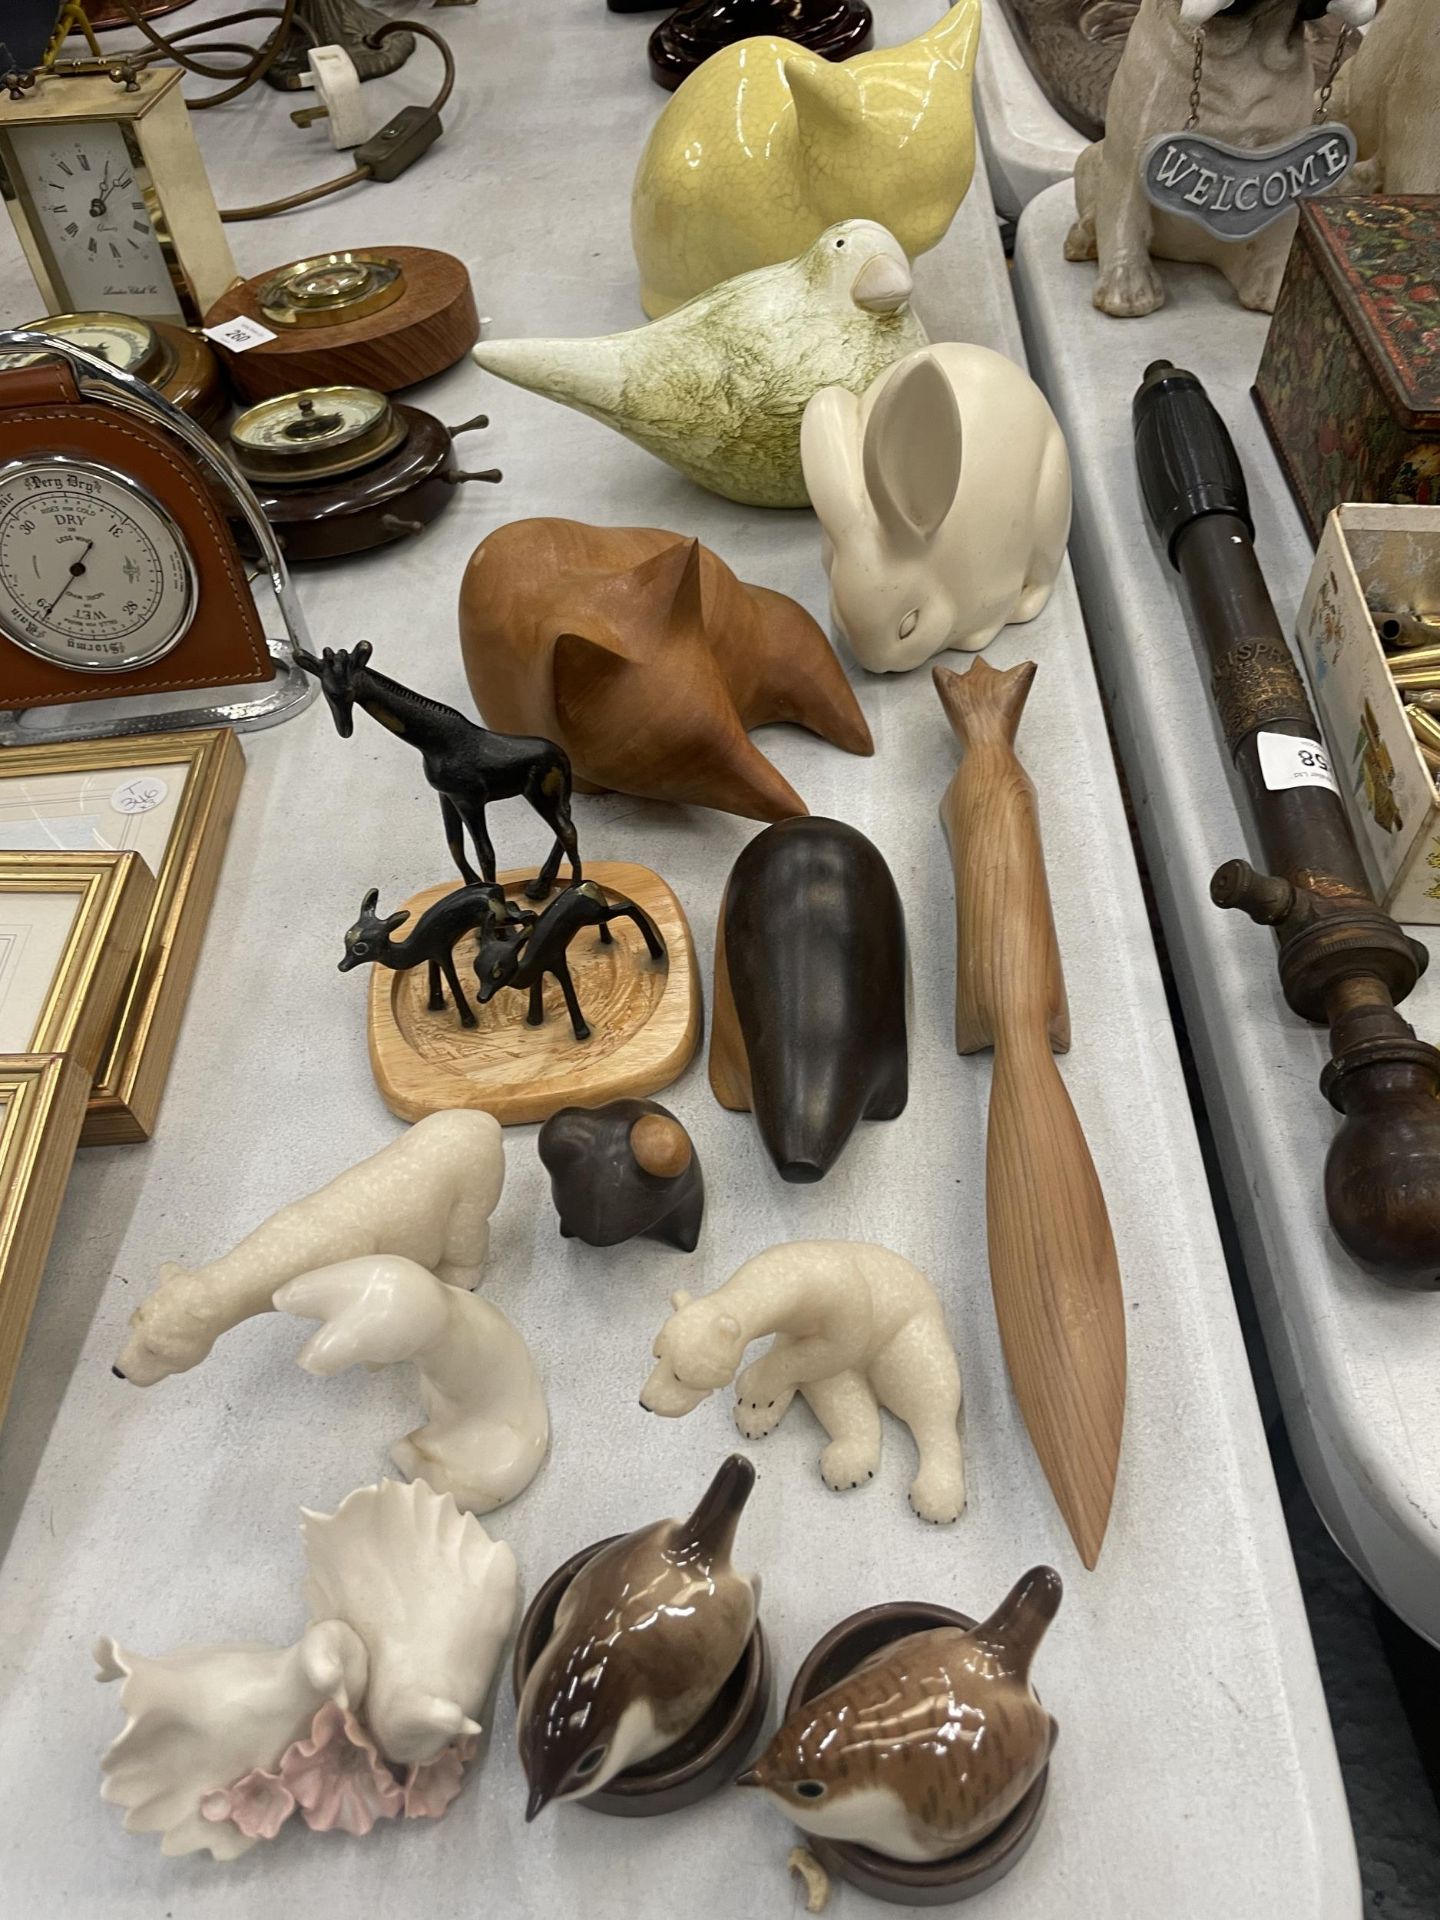 A QUANTITY OF ANIMAL FIGURES TO INCLUDE POLAR BEARS, WRENS, WOODEN FOXES, ETC - 14 IN TOTAL